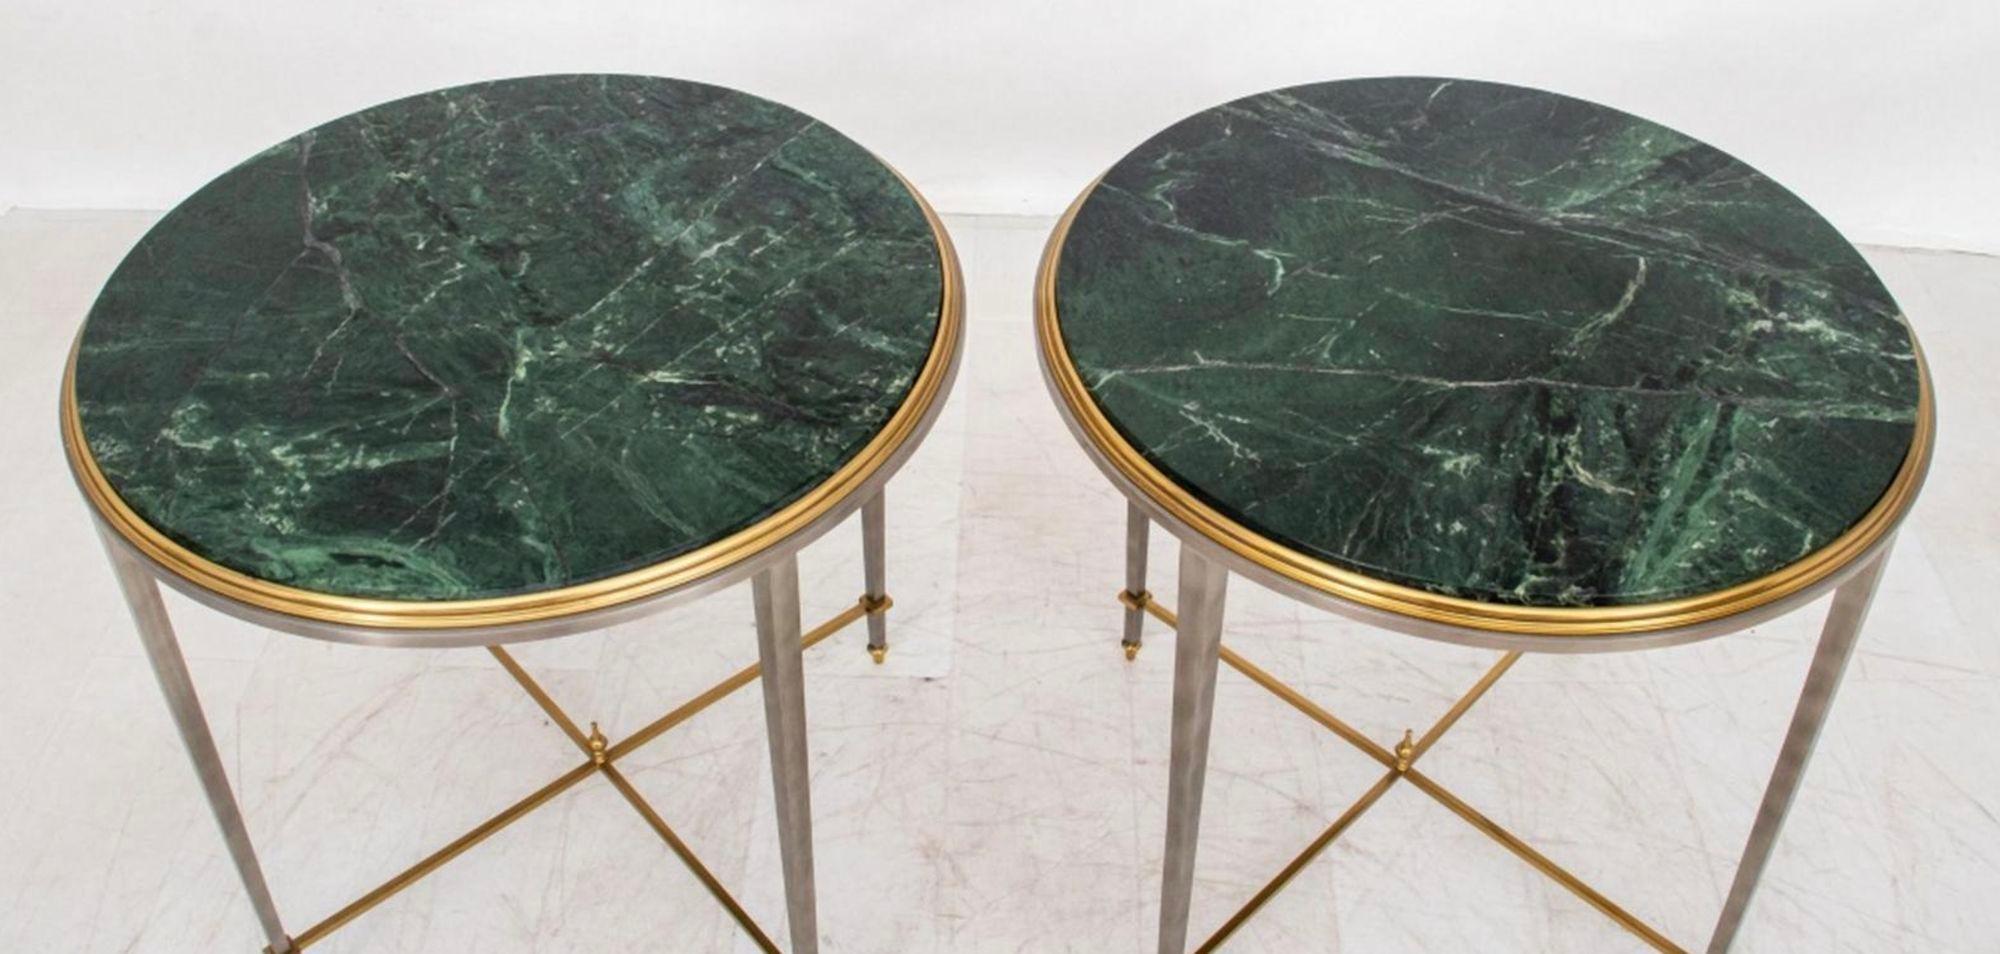 Pair of side tables by Maison Jansen, made in the 1970's, made with molded brass frames supported by steel resting on four square steel legs connected by a brass X-form stretcher. Topping each table is a round piece of Verde Antico marble, which